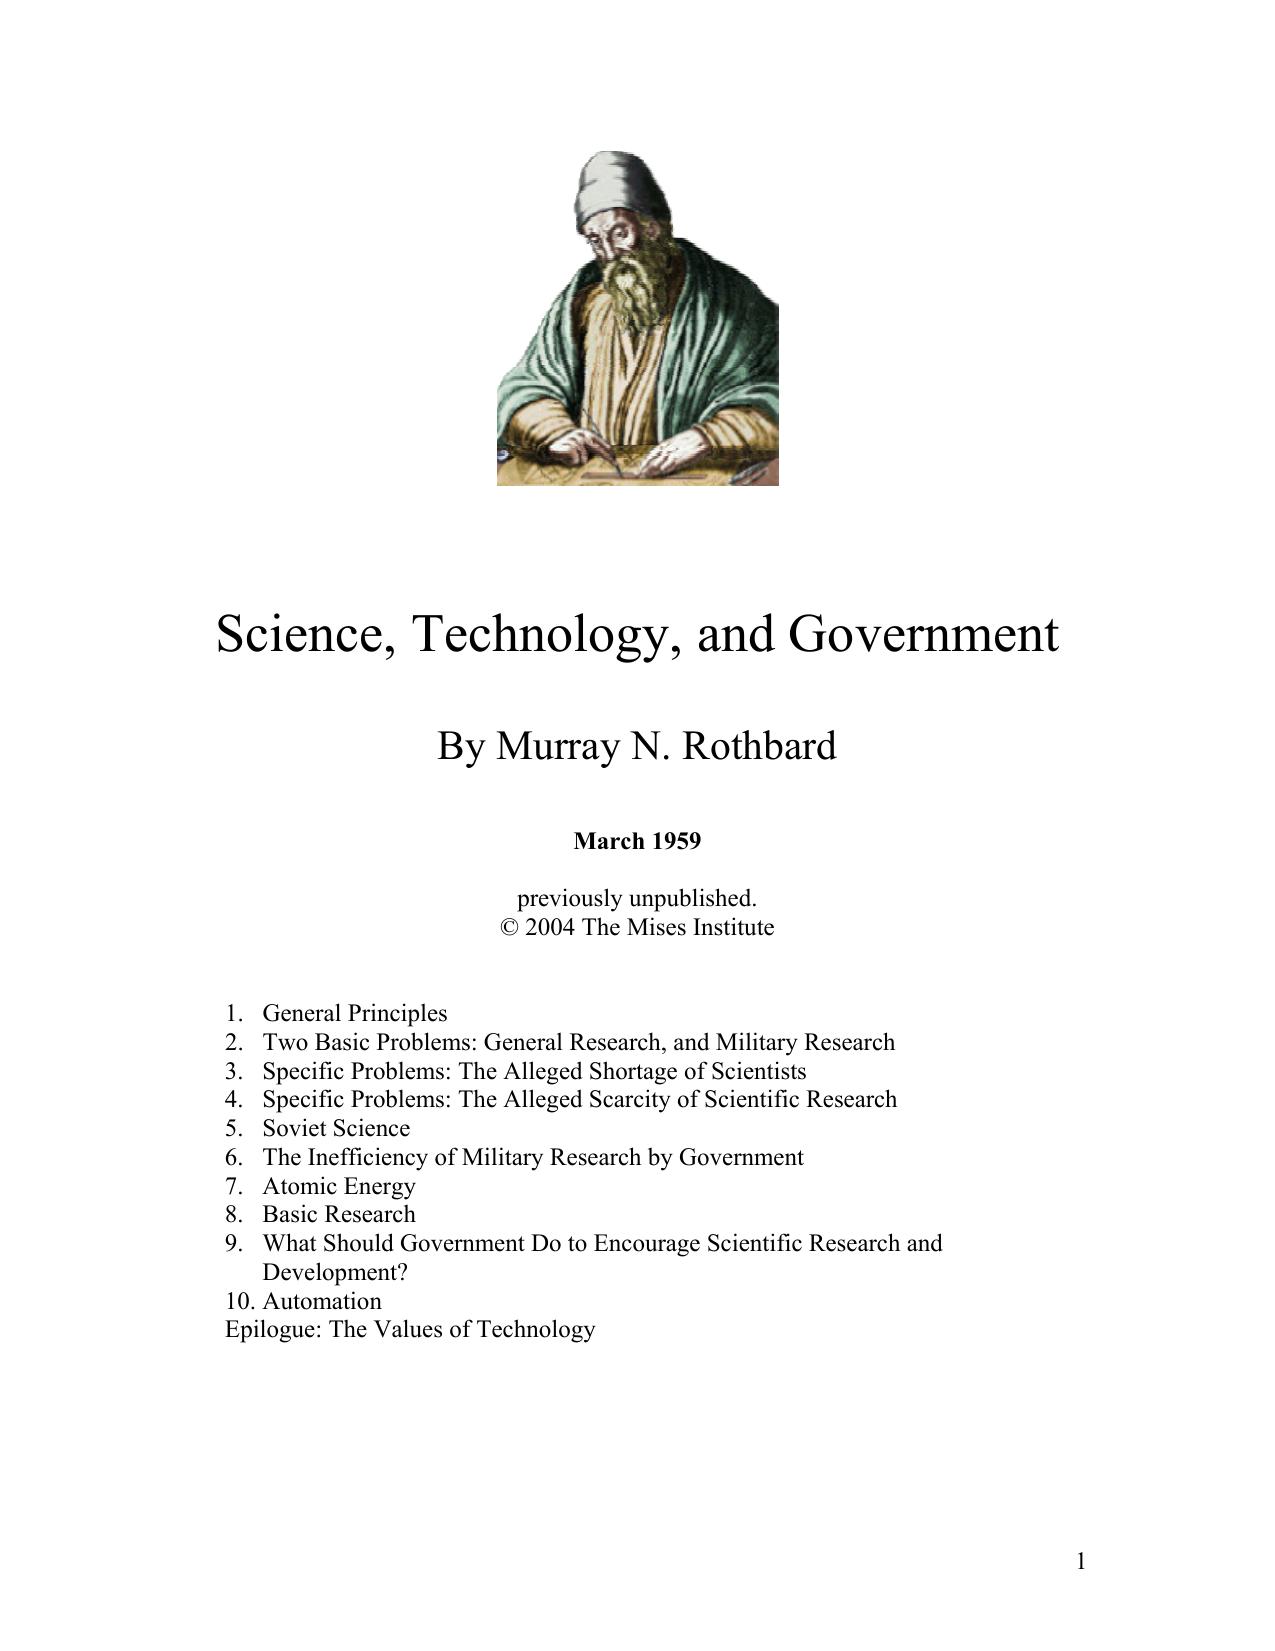 Science, Technology, and Government - Essay